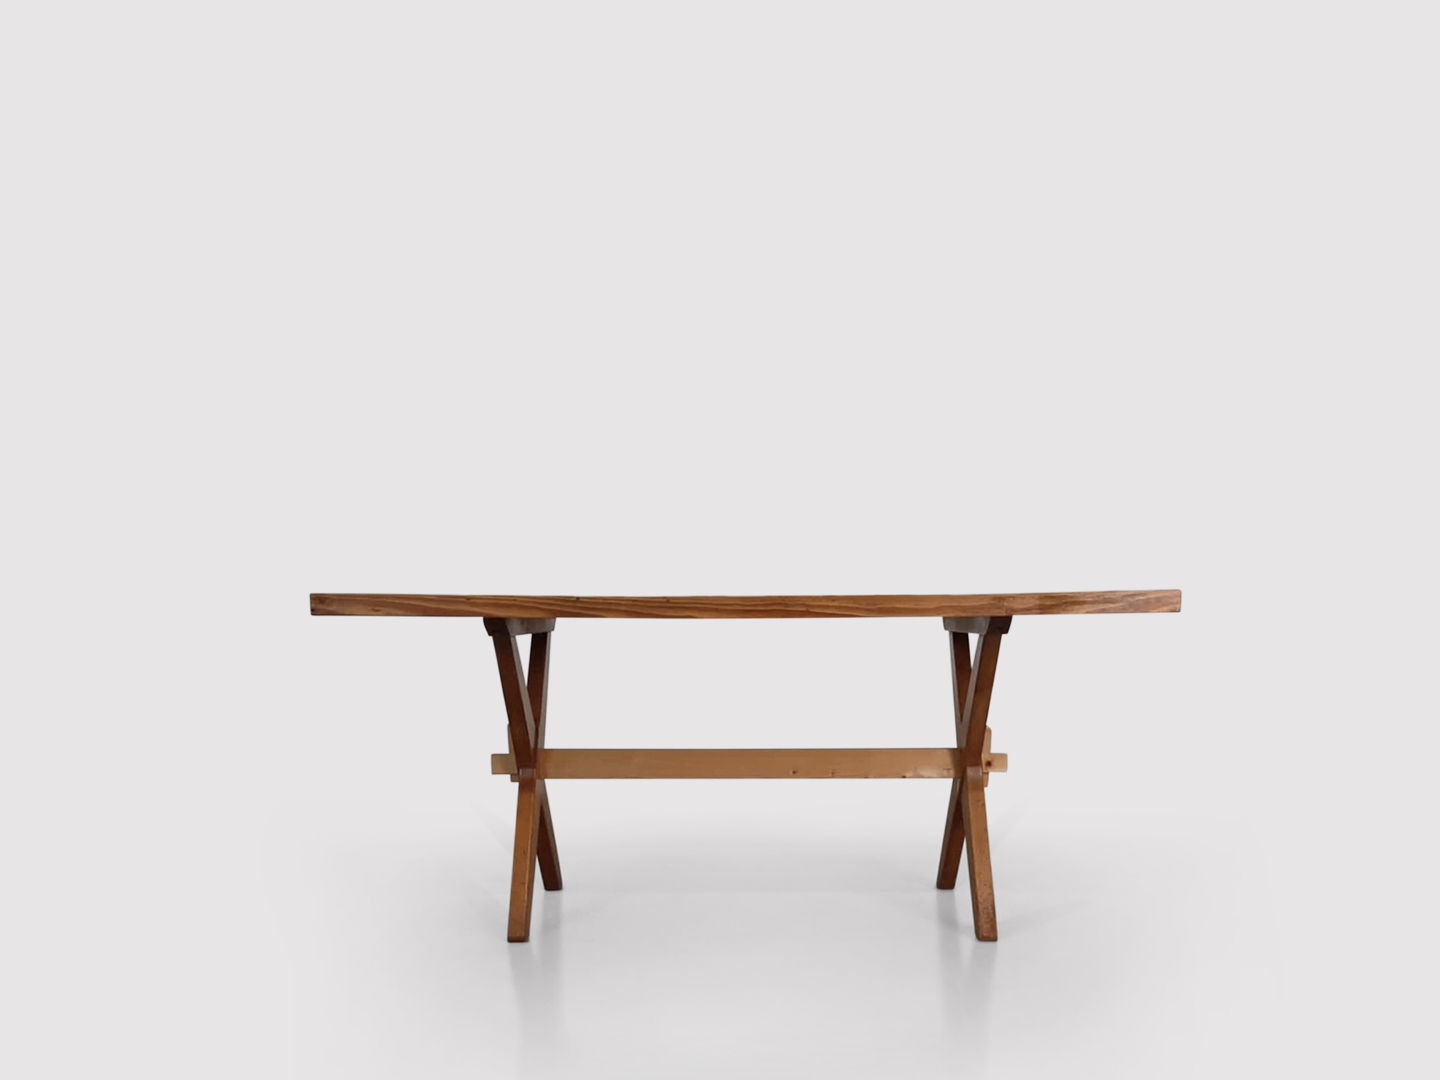 Dining table by Wim den Boon and W.J. Kok for Goed Wonen Netherlands 1950s